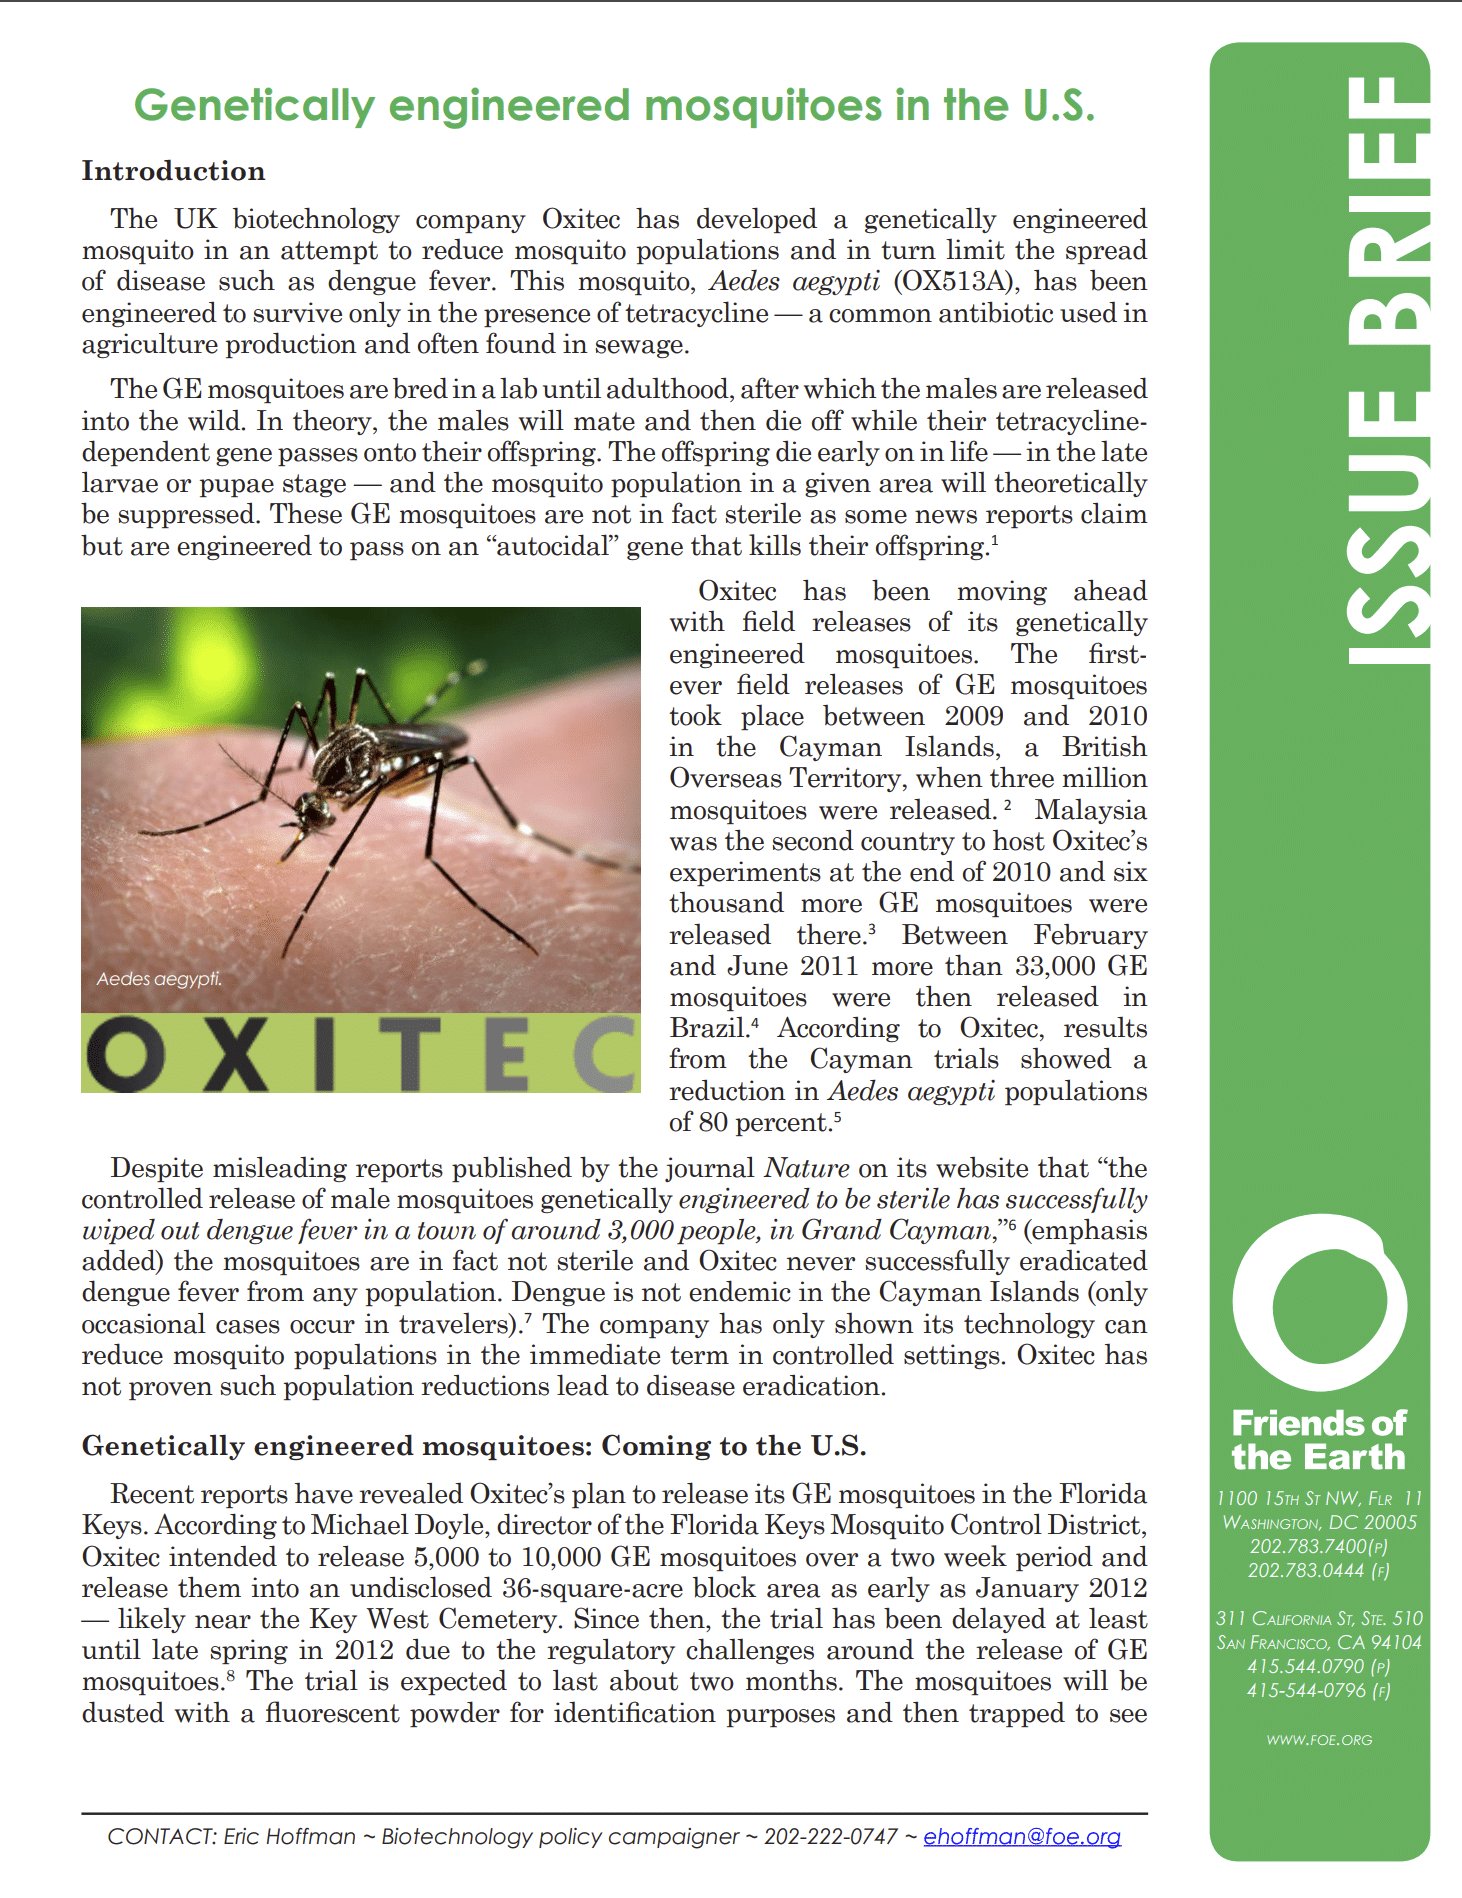 Genetically Engineered Mosquitoes in the U.S. Issue Brief